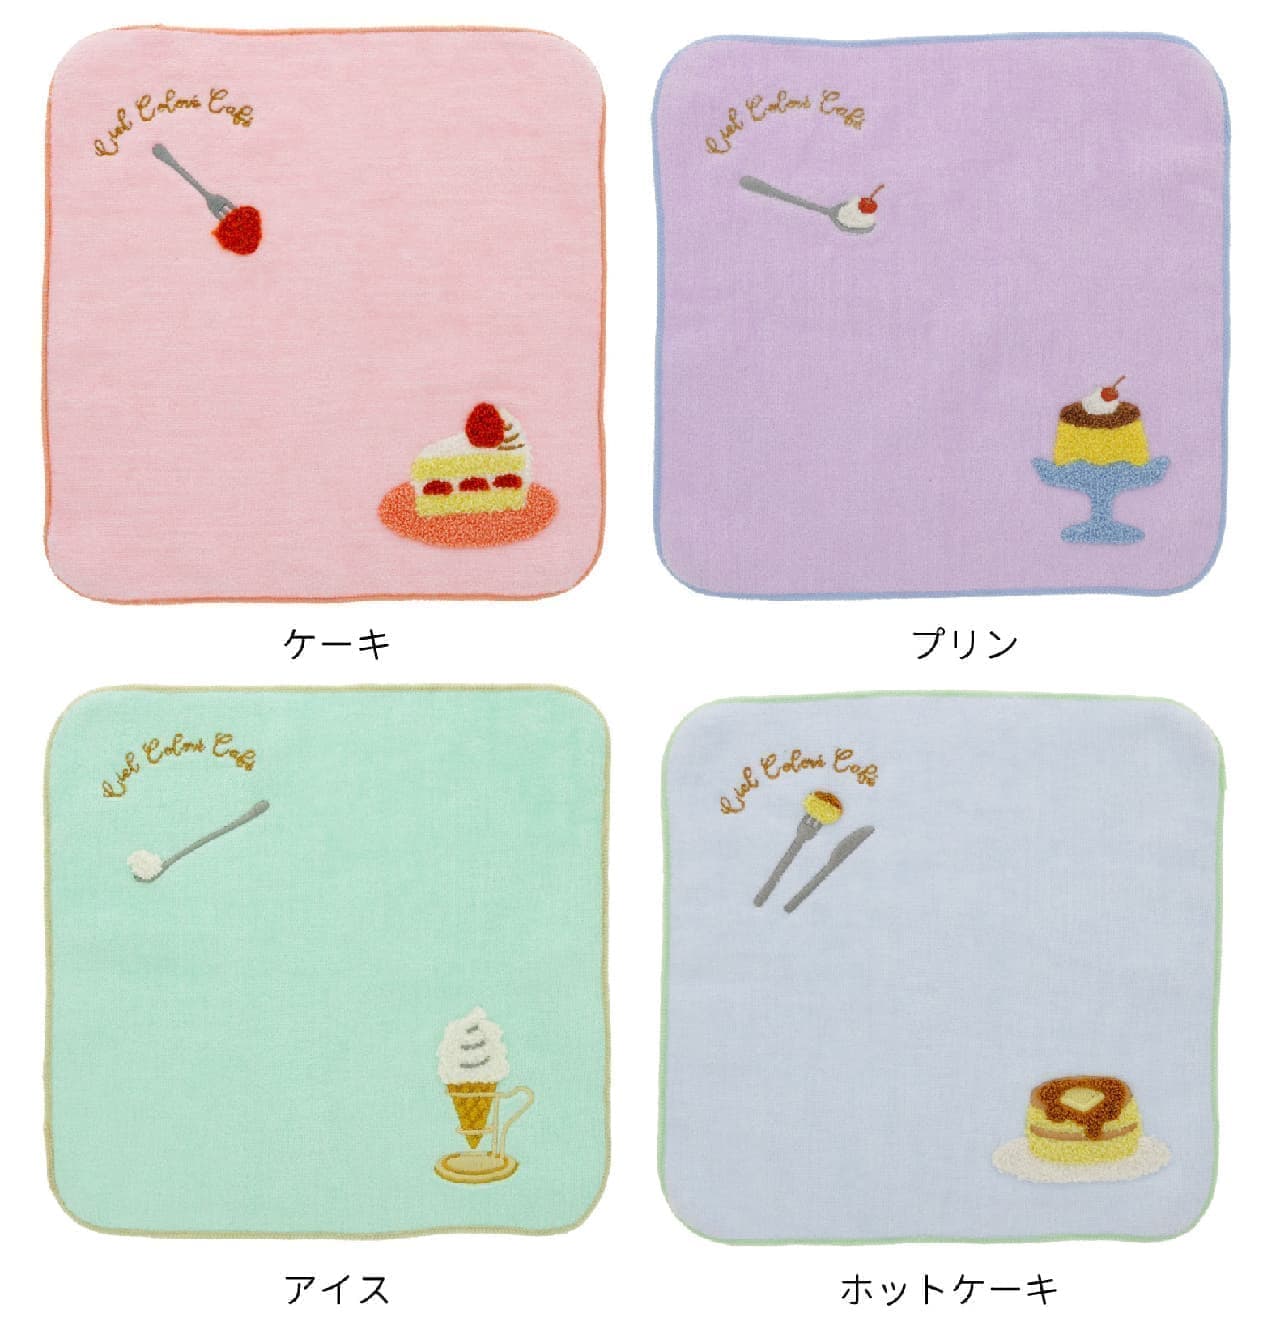 Stationery miscellaneous goods "OMISE" in the cafe menu Hot cakes, puddings, ice-patterned masts, notepads, etc.